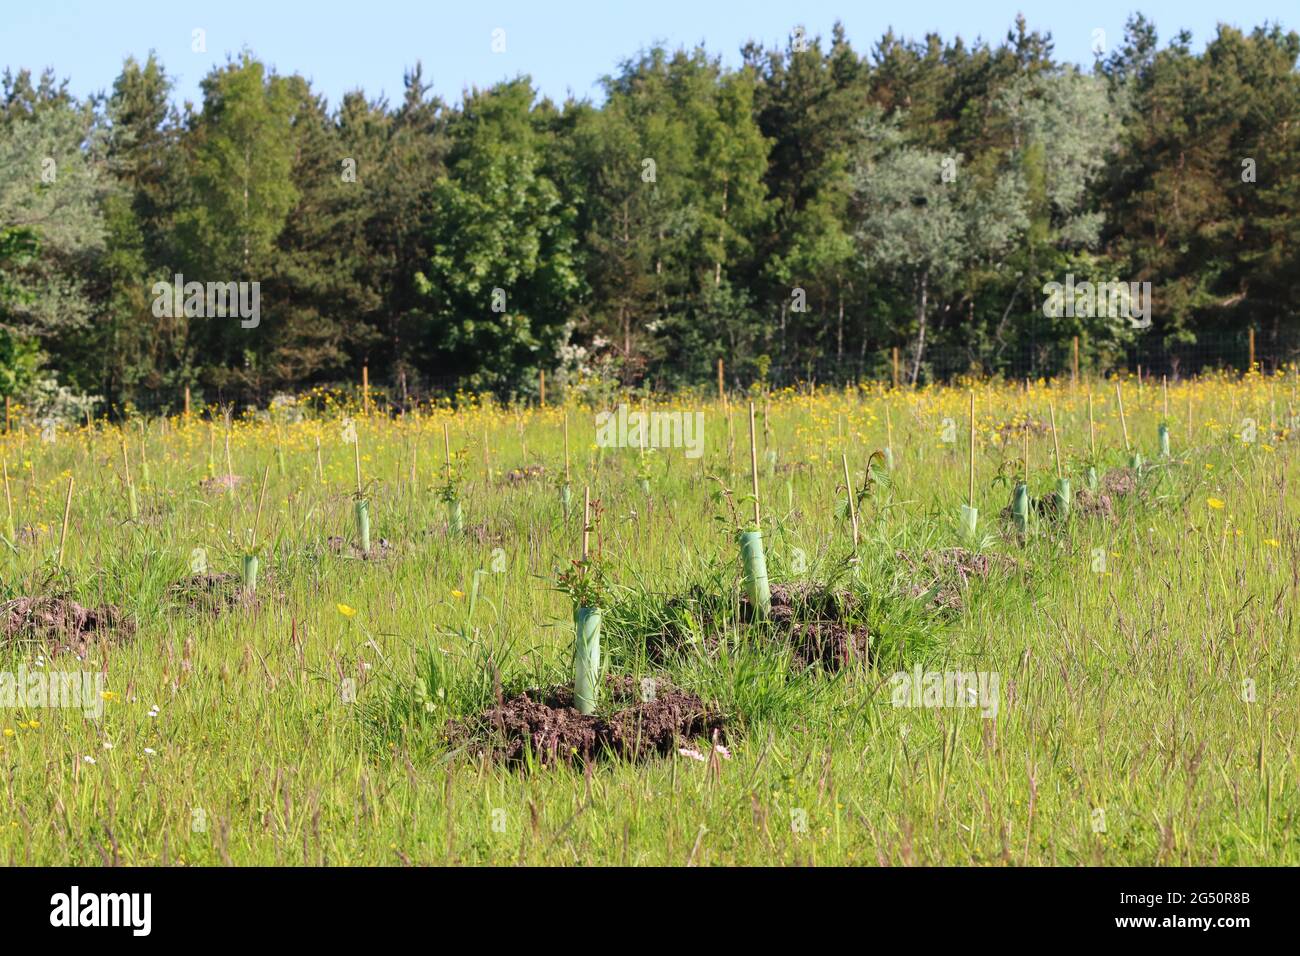 Rows of newly planted Trees in a Nature Reserve, County Durham, England, UK. Stock Photo